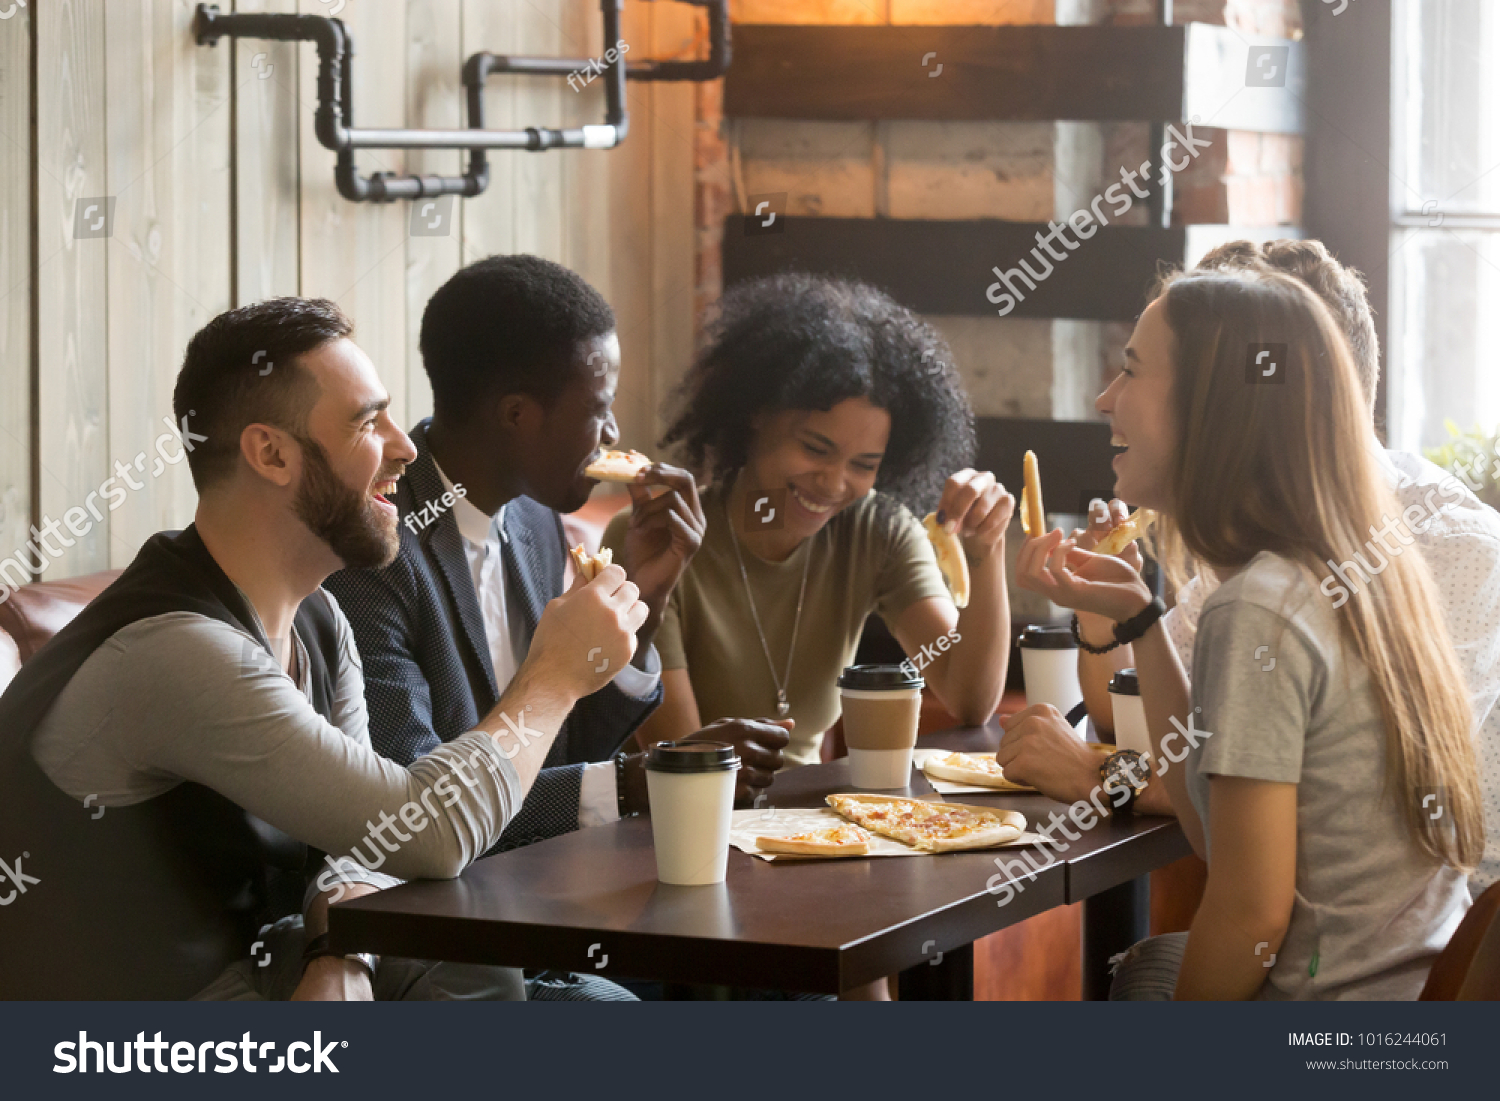 Multiracial happy young people eating pizza in pizzeria, black and white cheerful mates laughing enjoying meal having fun sitting together at restaurant table, diverse friends share lunch at meeting #1016244061